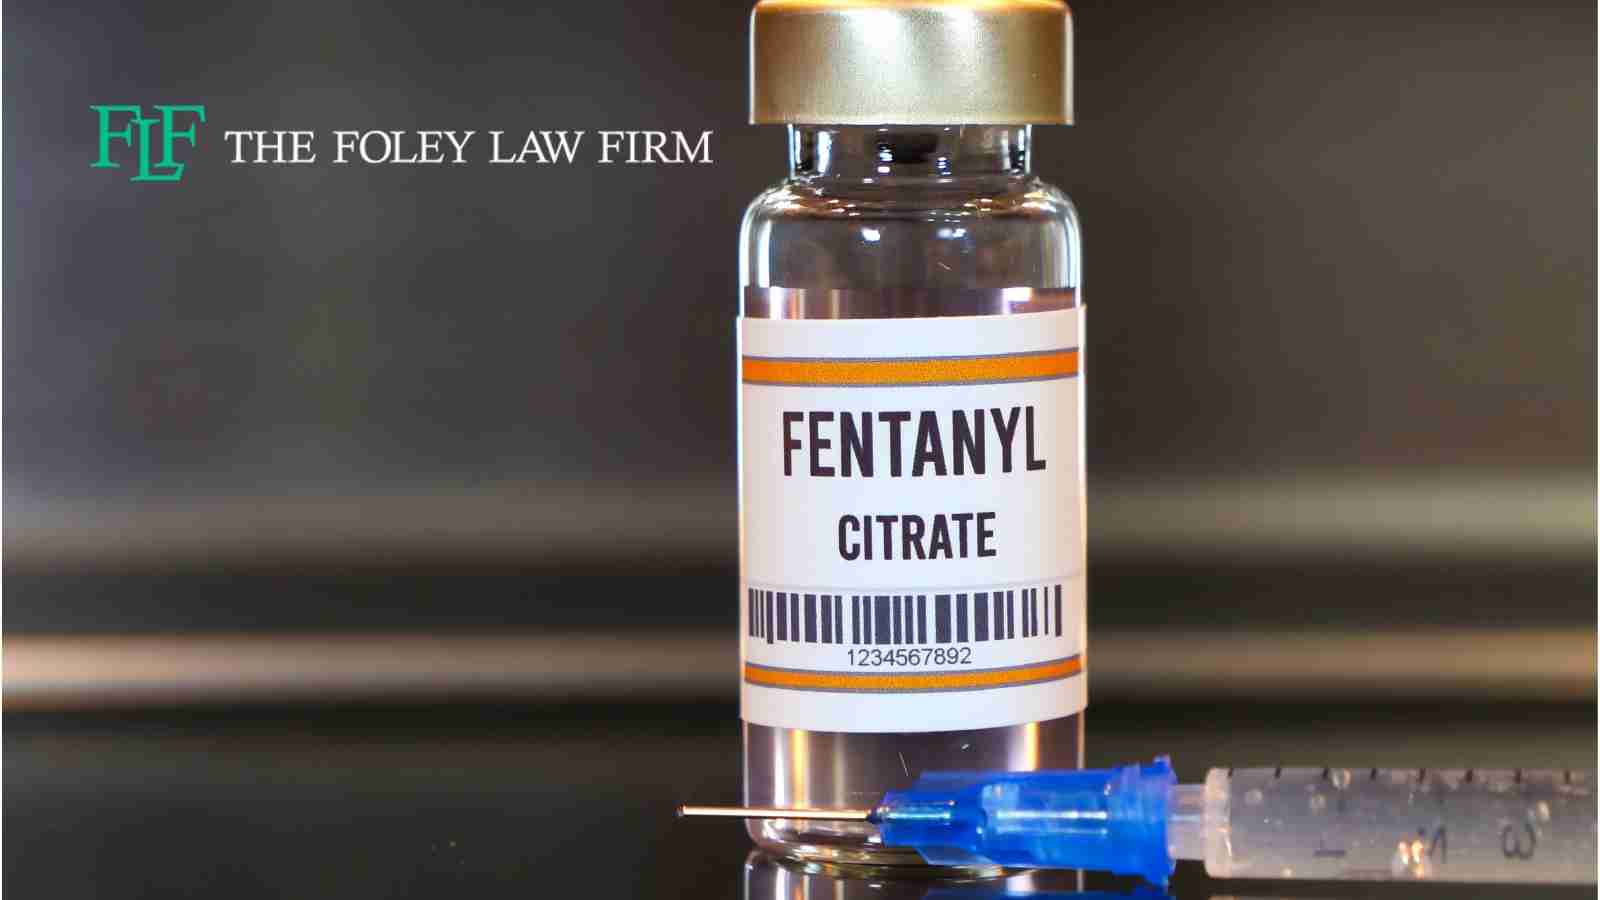 Possession of 1 gram of fentanyl is now a felony in Colorado